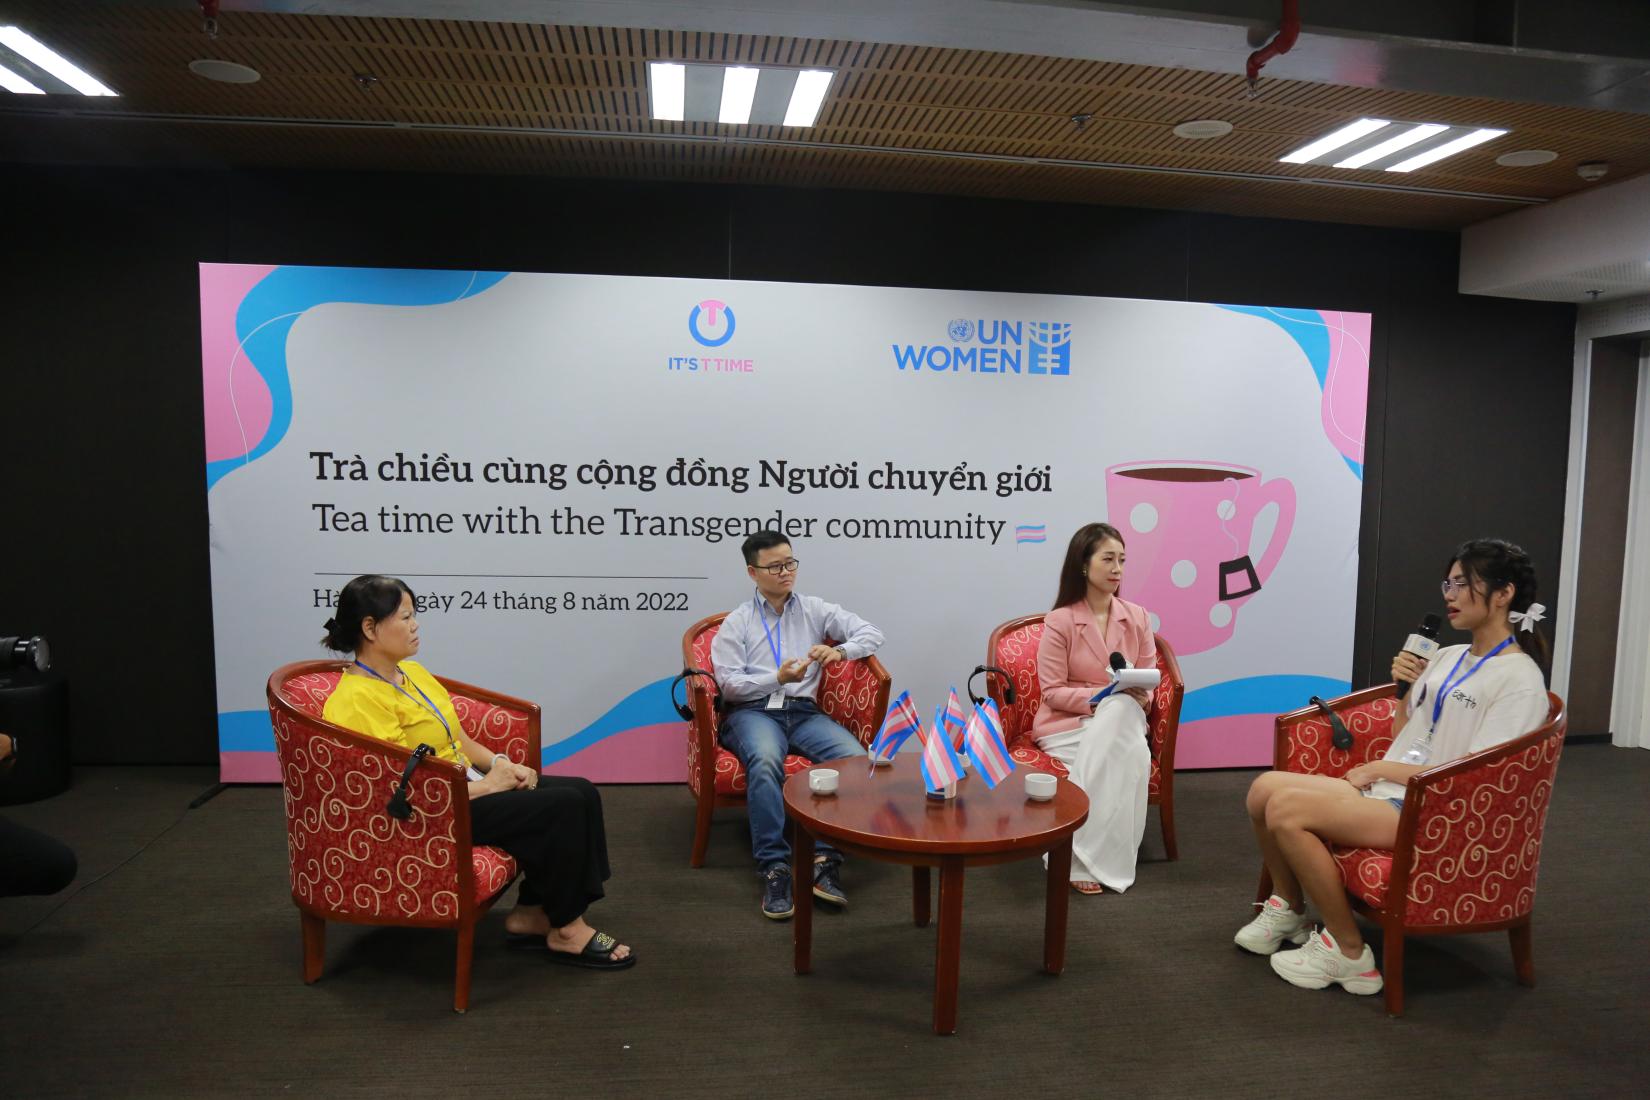 The dialogue started with a conversation with the transgender and their parents